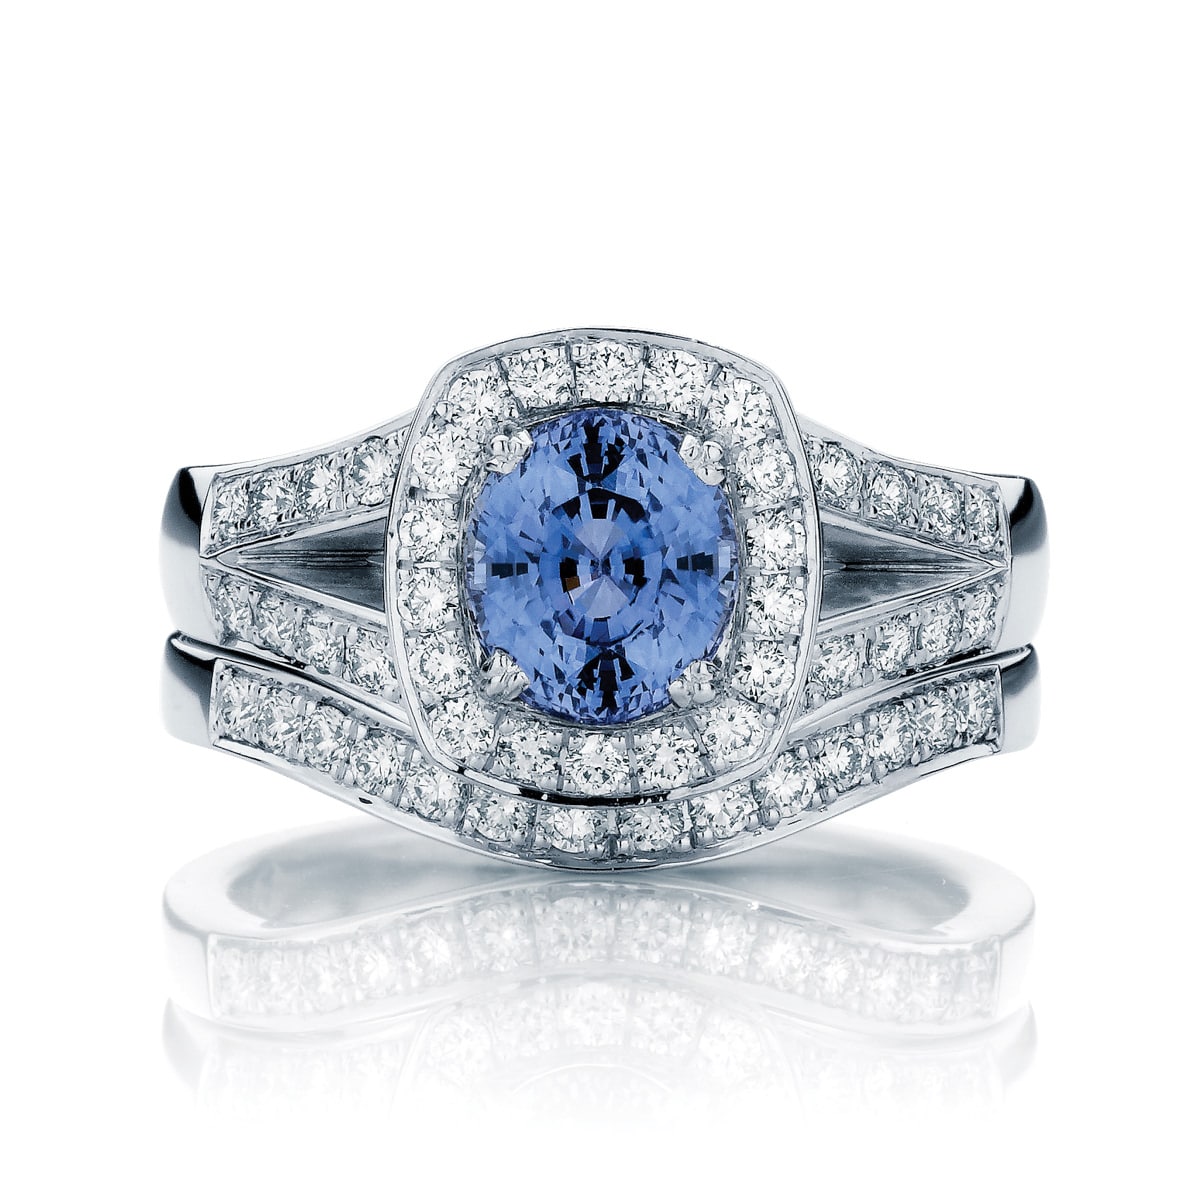 Unique Wedding Ring Set With Sapphire Engagement Ring | Jewelry by Johan -  Jewelry by Johan